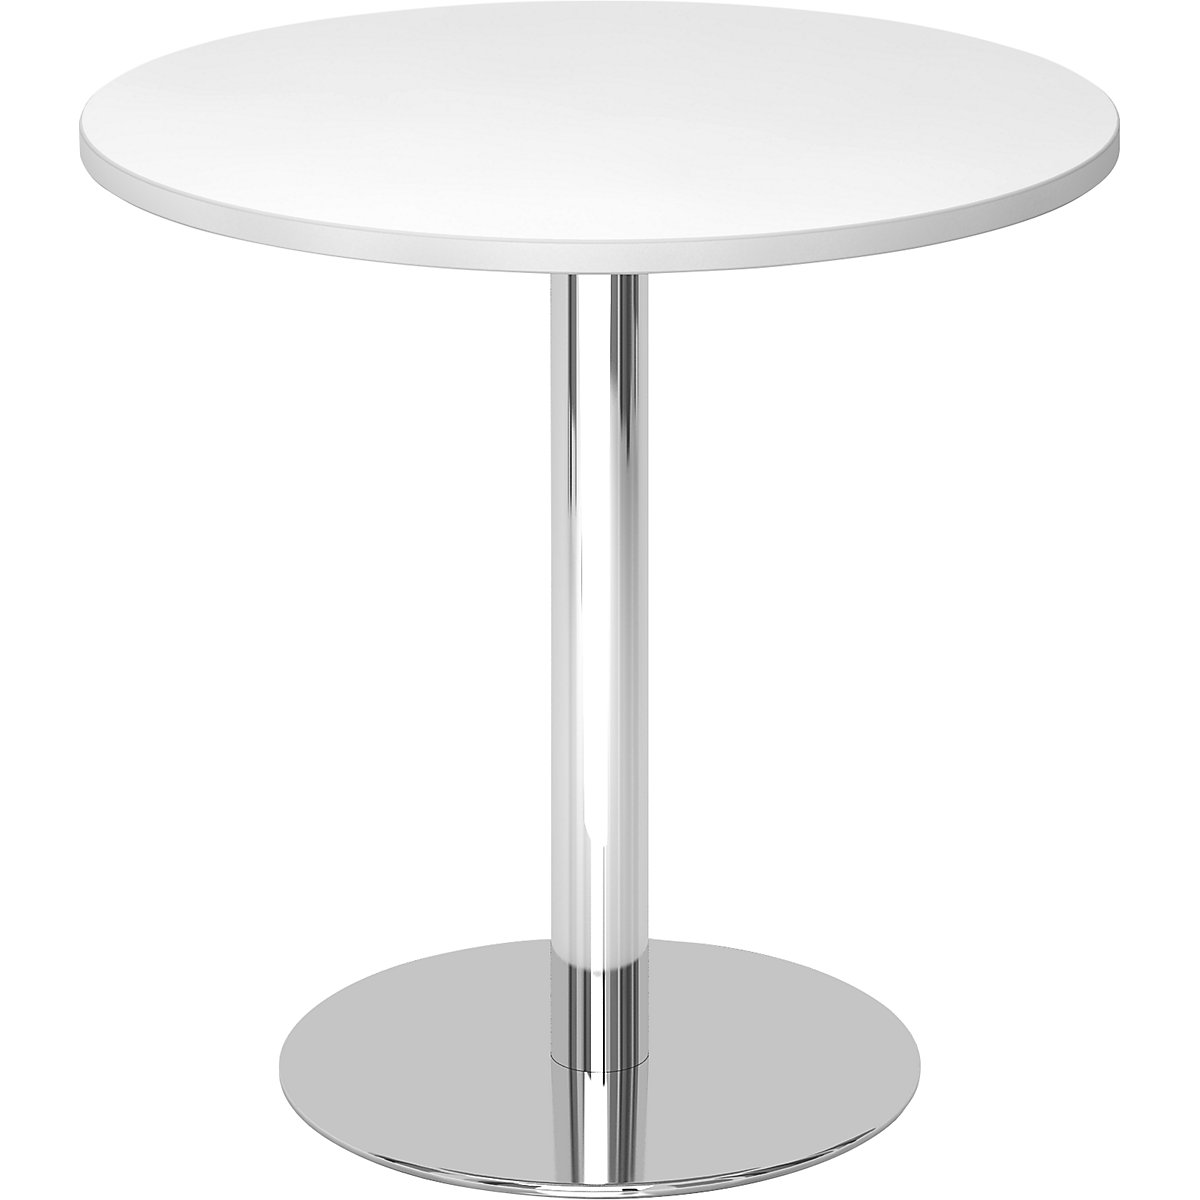 Conference table, Ø 800 mm, 755 mm high, chrome plated frame, tabletop in white-6